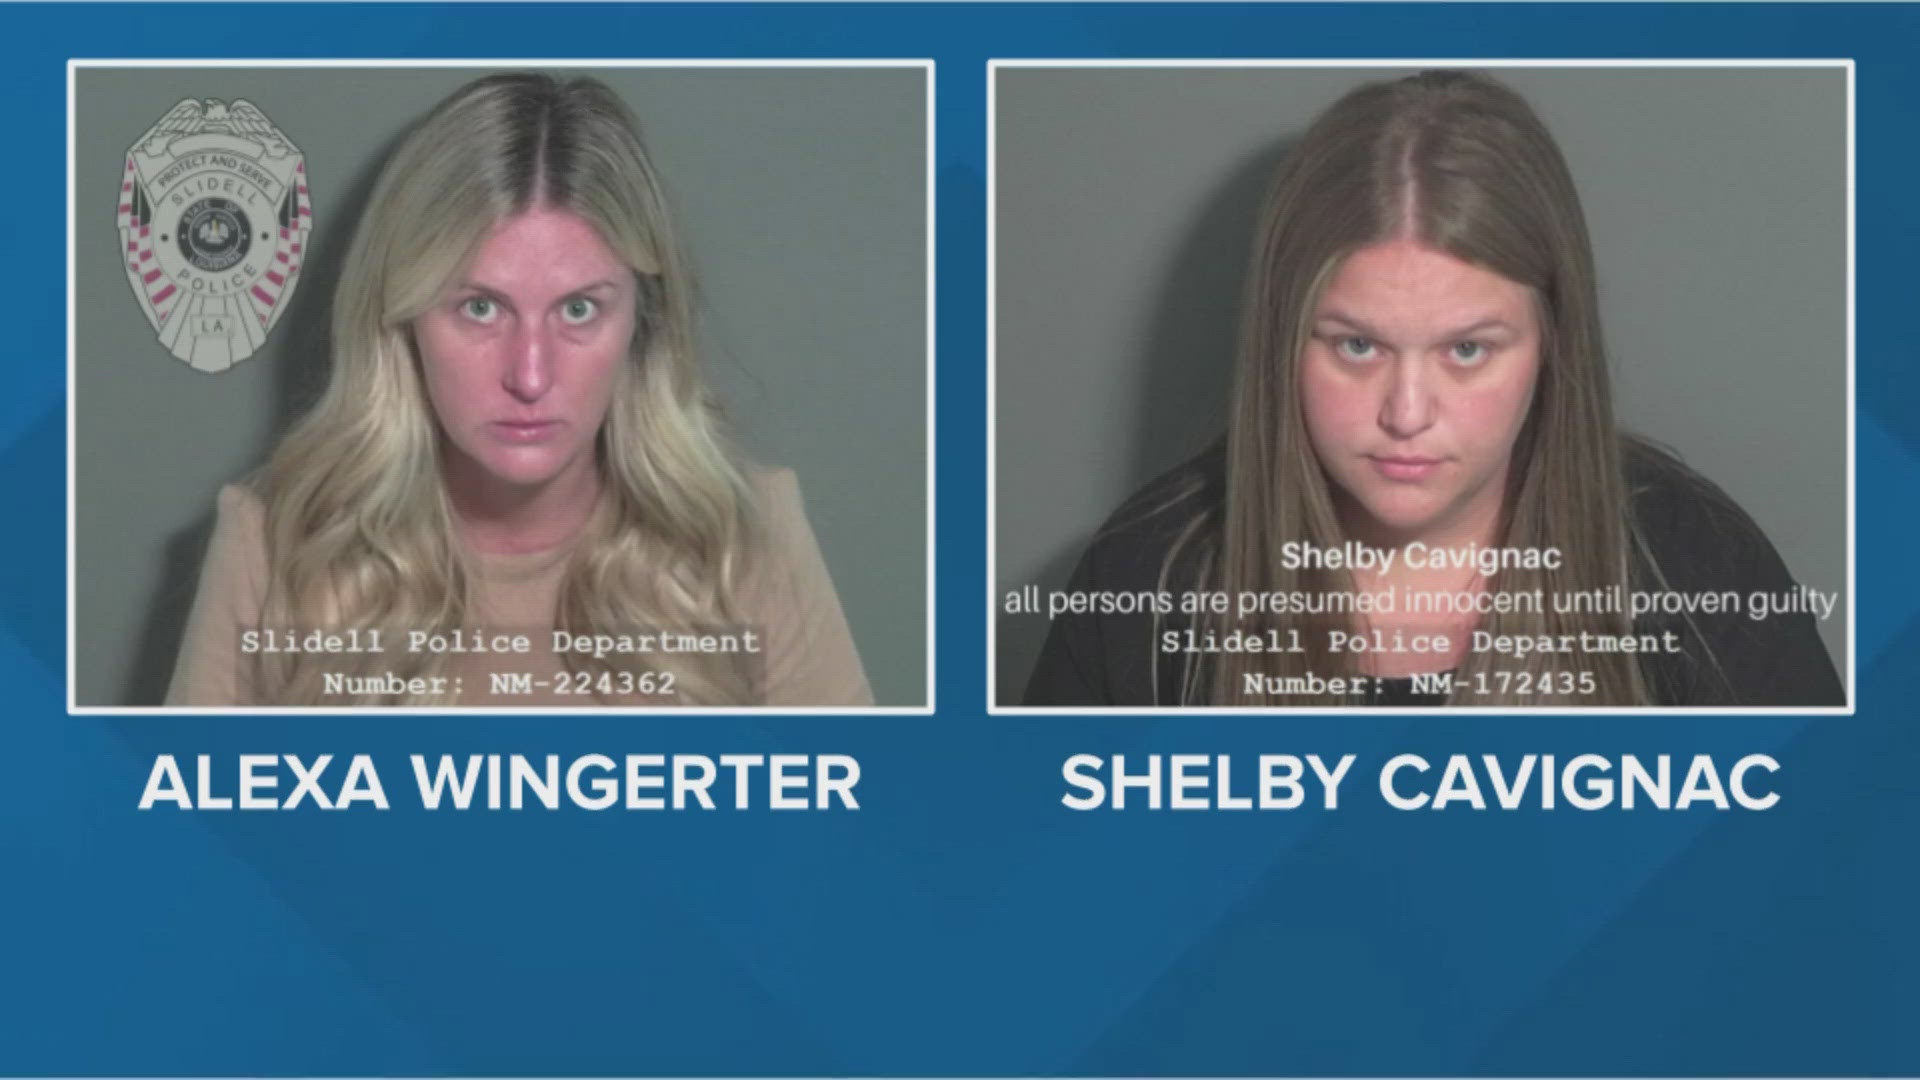 Shelby Cavignac, 31, was arrested following an investigation on former teacher Alexa Wingerter, 35, who was accused of sending inappropriate photos.